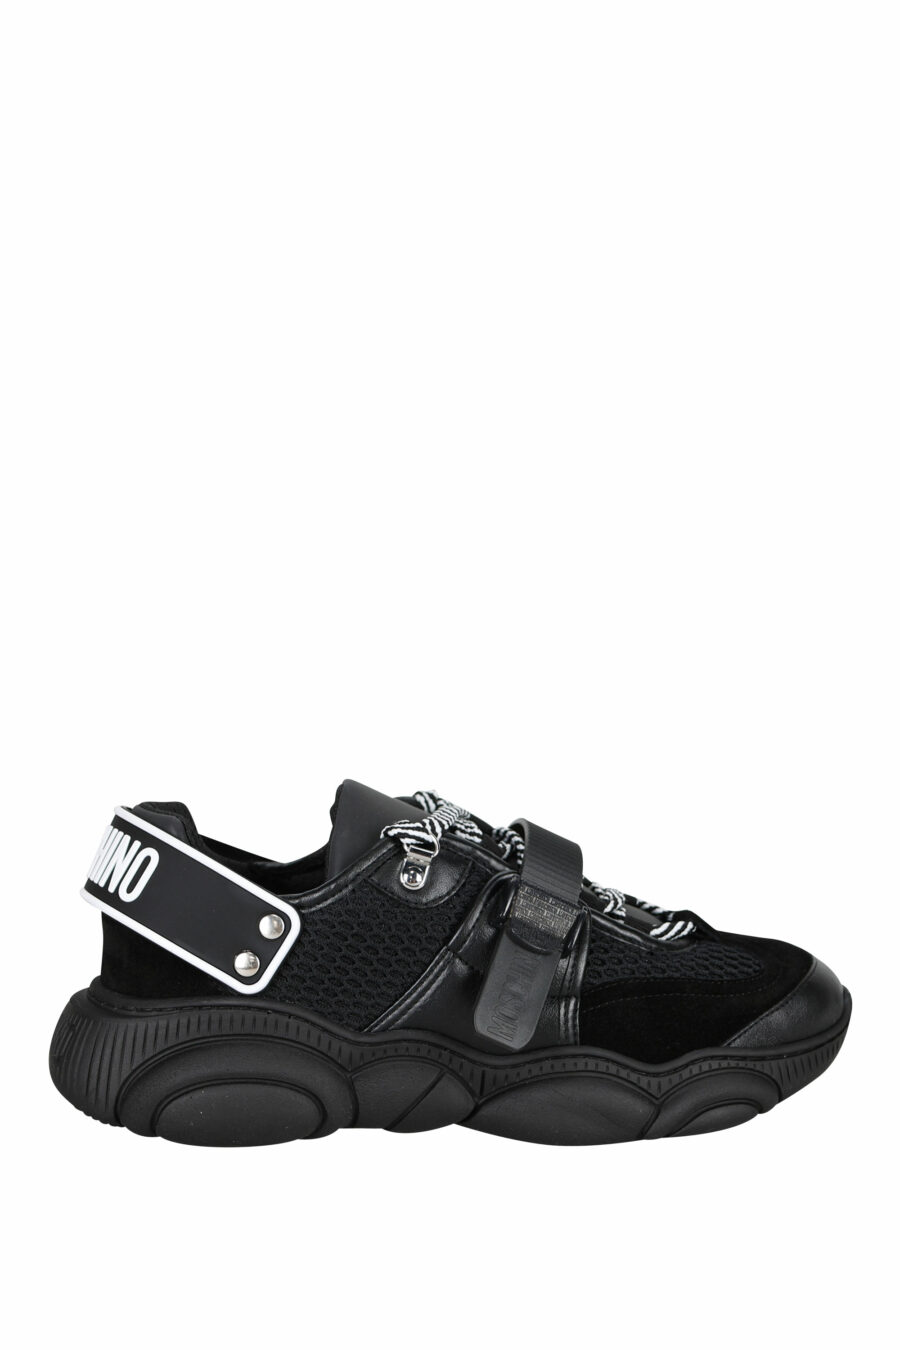 Black trainers with laces and velcro and rubber logo - 8054653226388